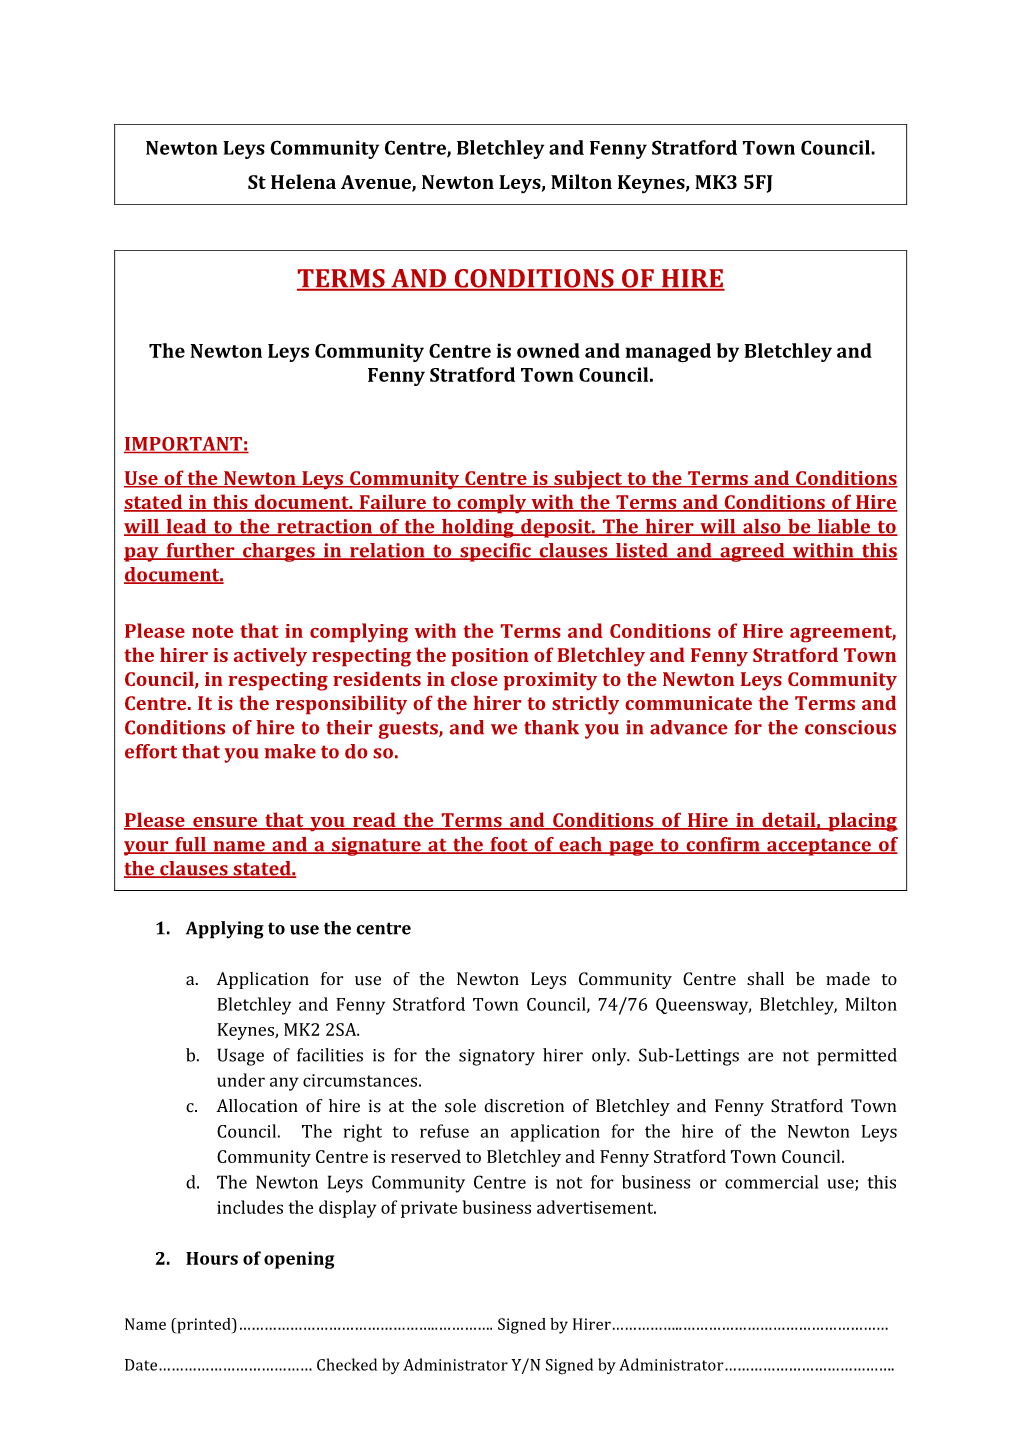 Terms and Conditions of Hire